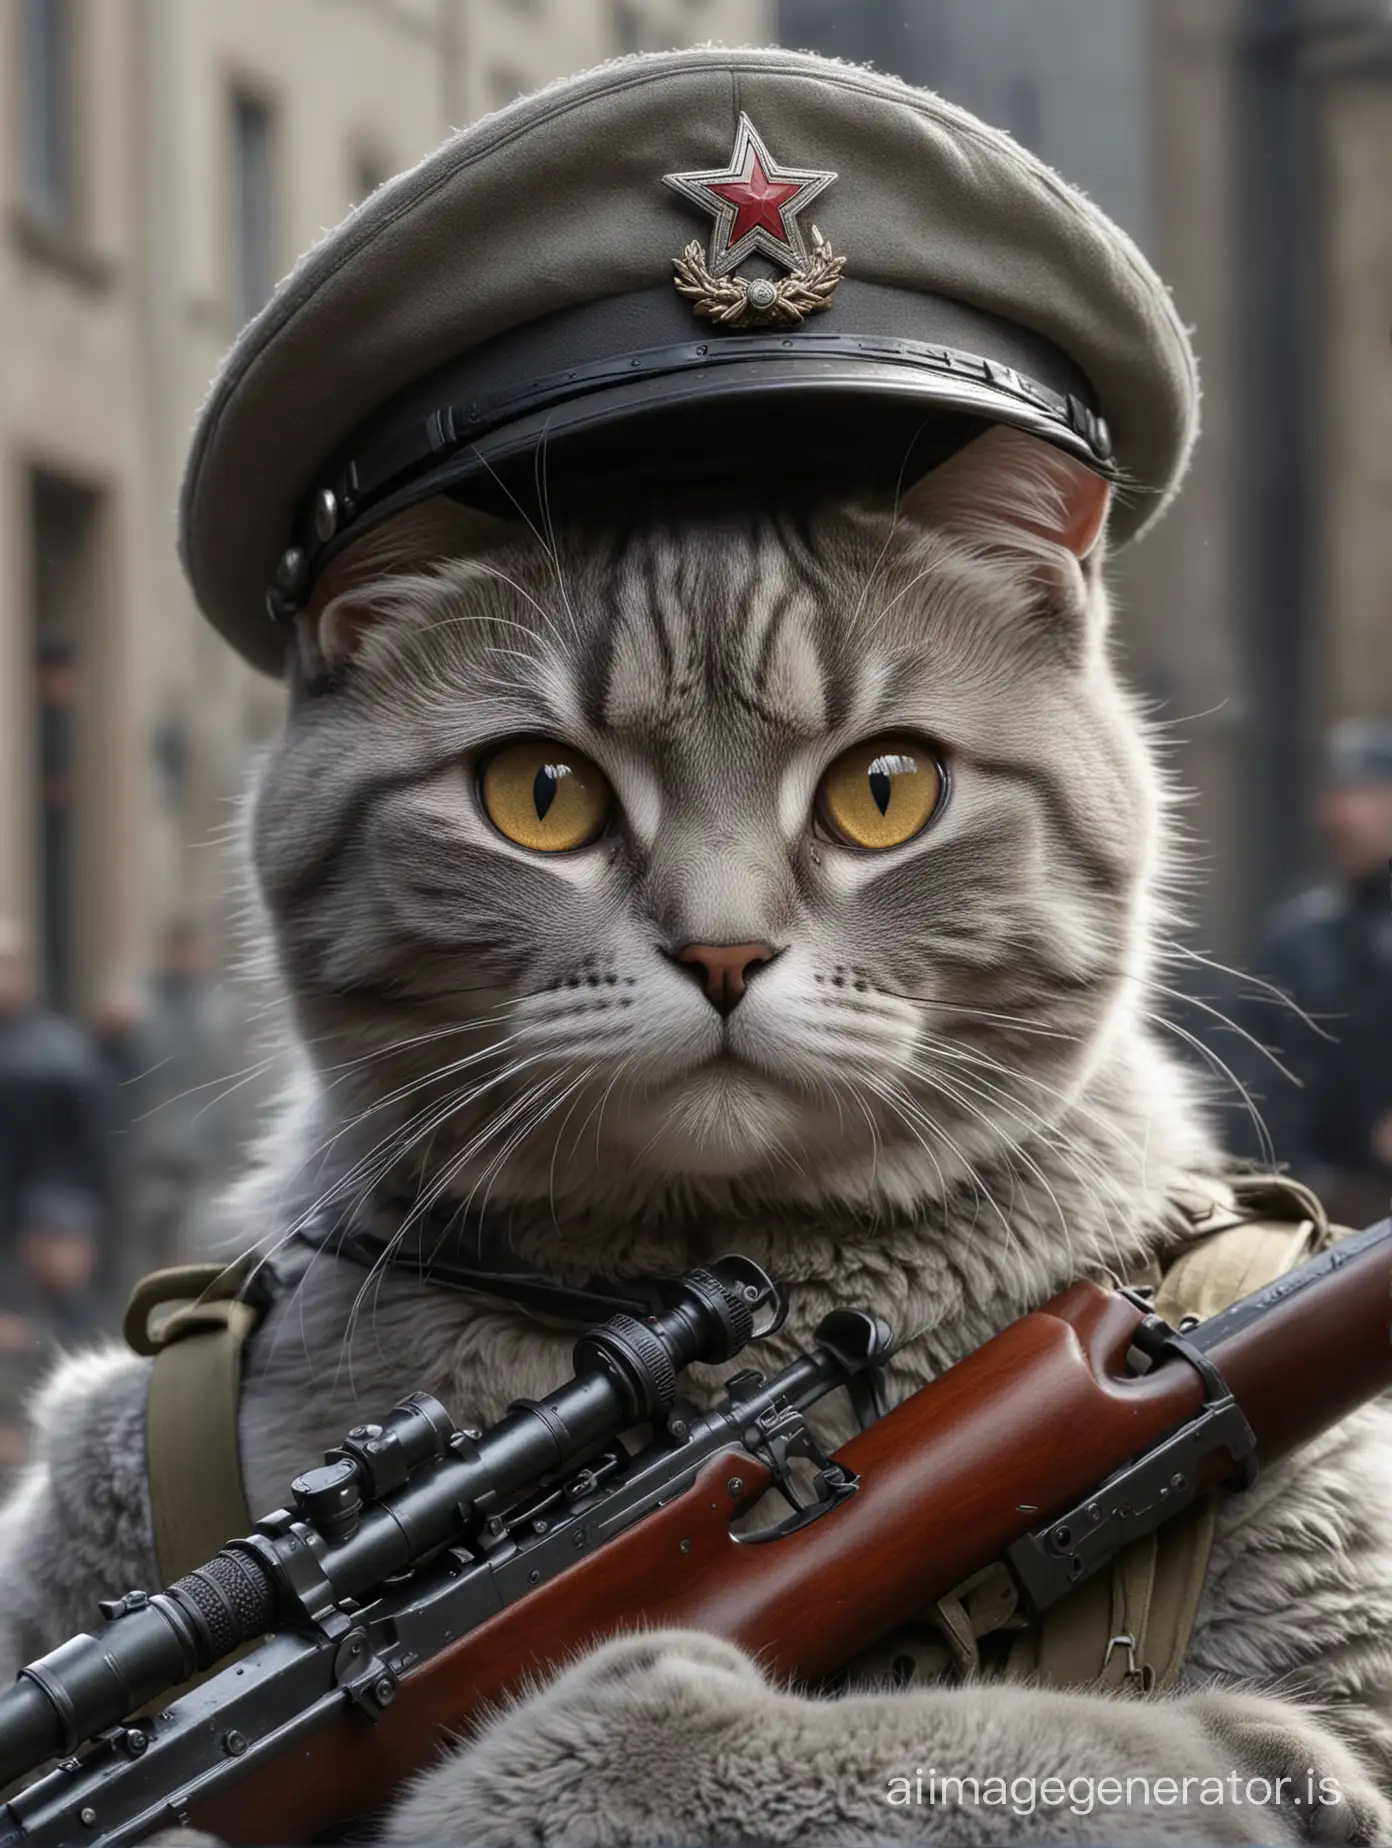 4k, realistic, HD. Soviet officer 1944 style light grey grey eyed cat with Mosin rifle in hand in Berlin